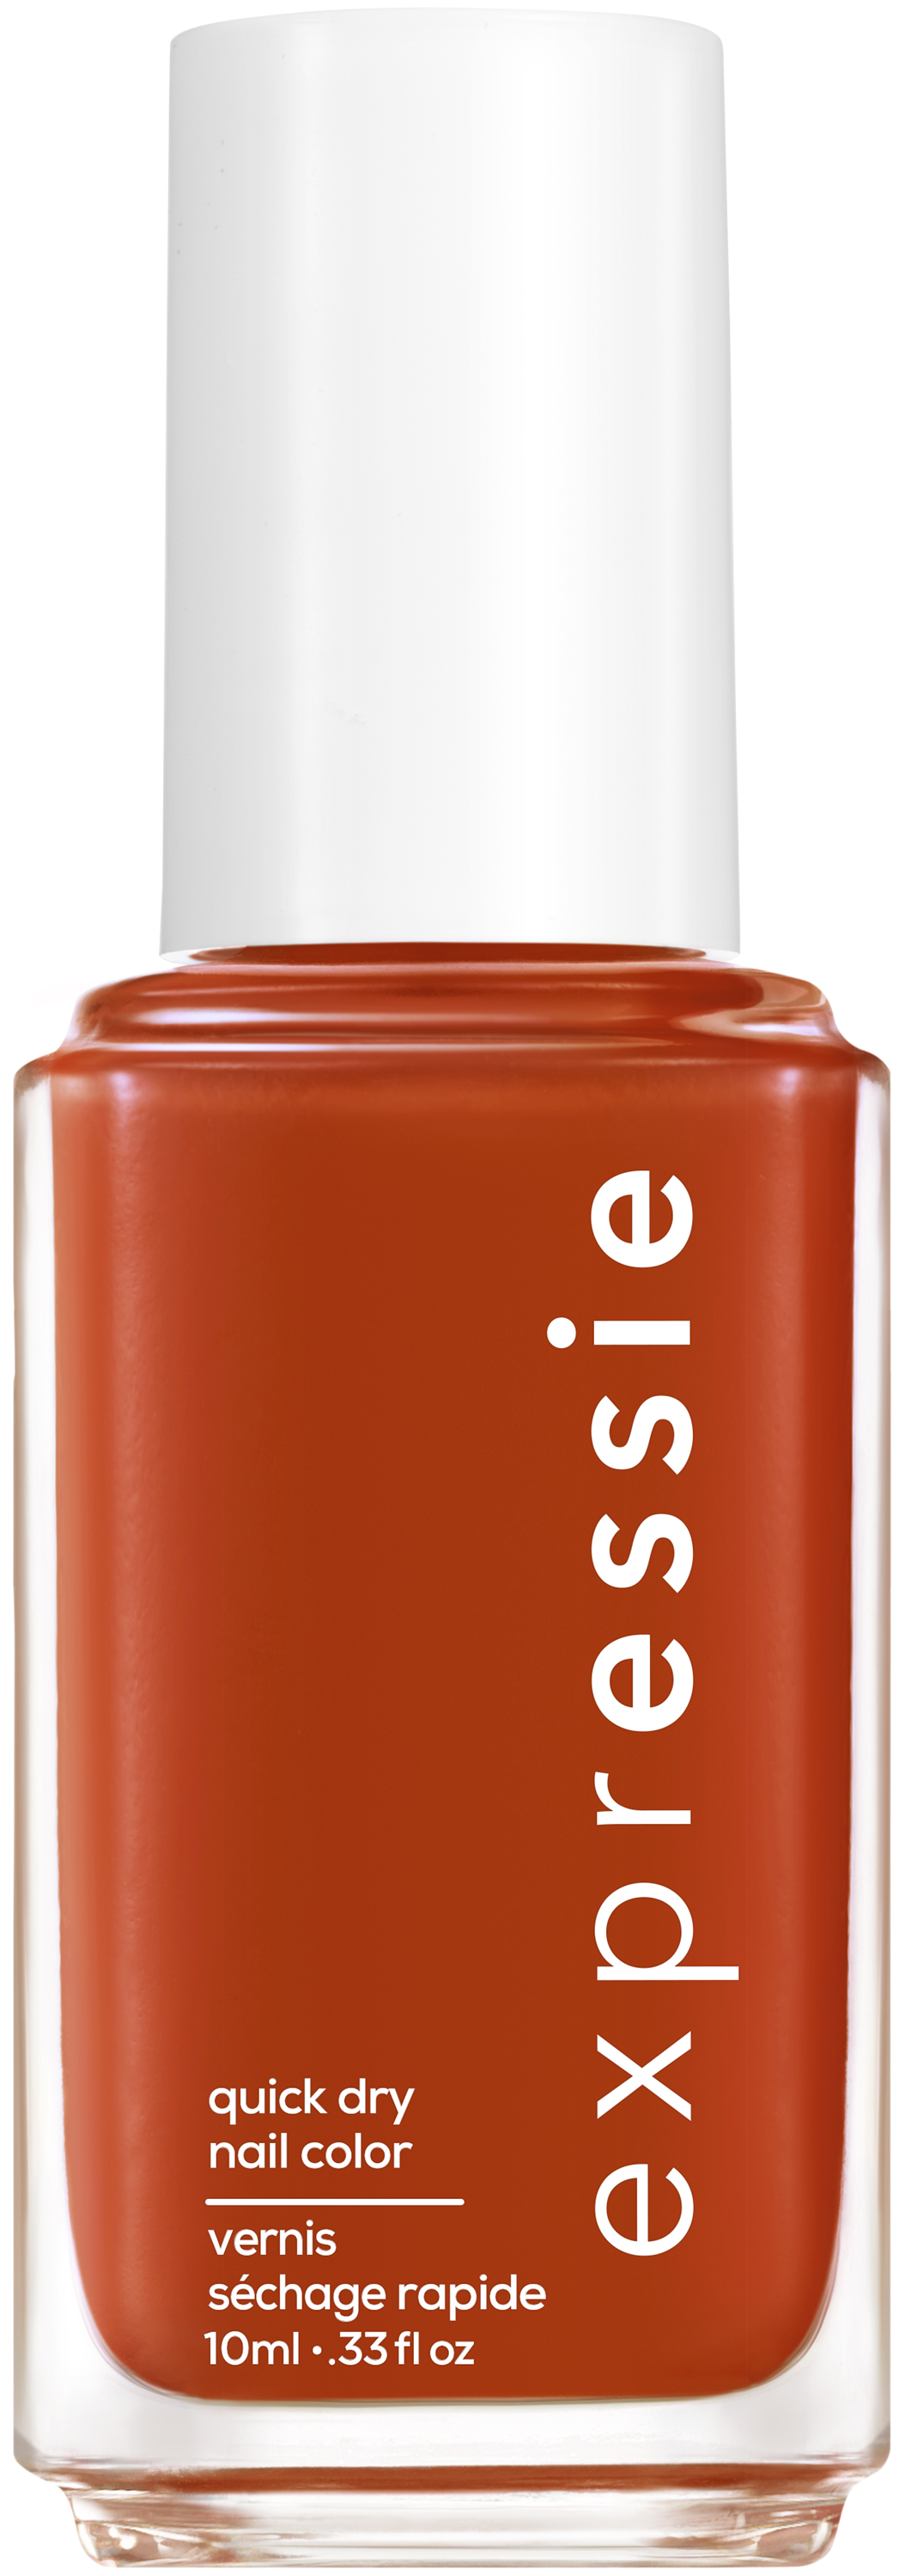 Quick Expressie Dry Nail Essie Color